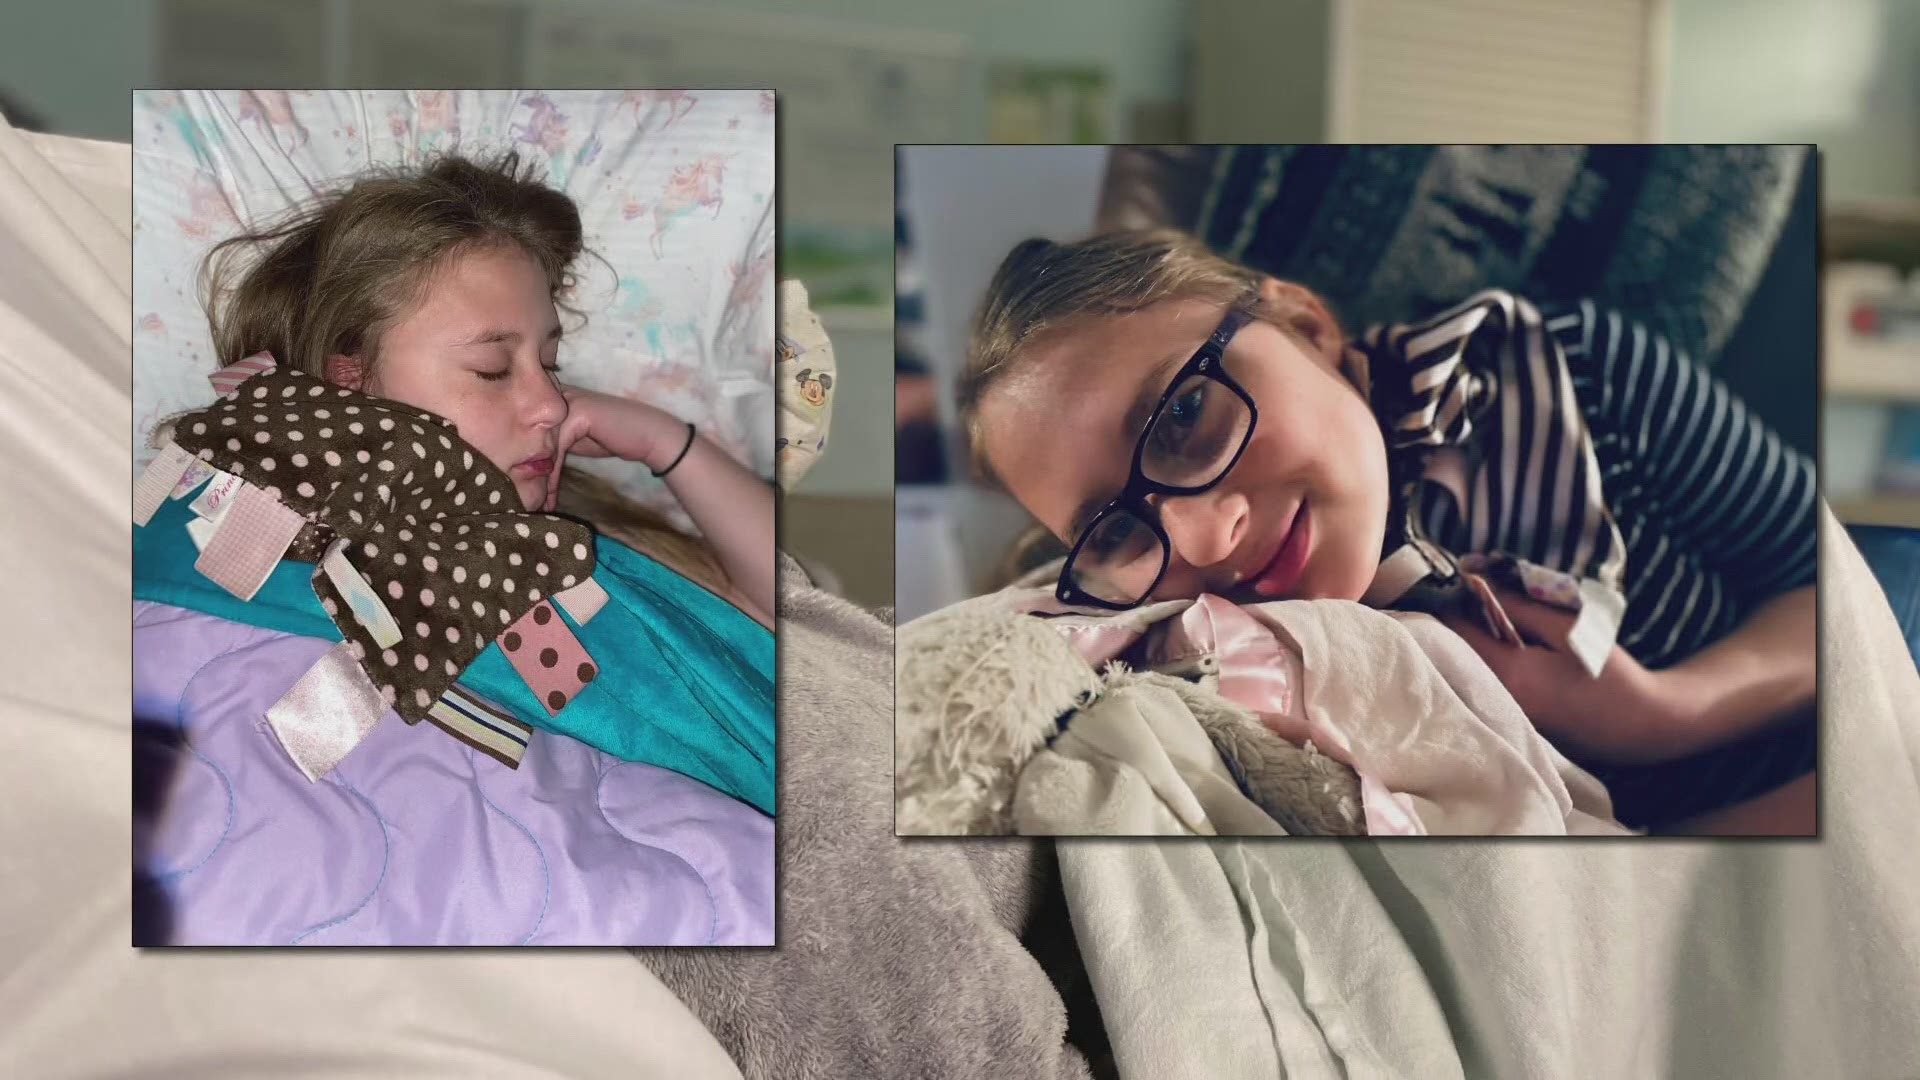 Riley-Jo Peltier has been in-and-out of hospitals since she was born at 23 weeks. Her blanket has given her strength through it all, until it went missing this week.